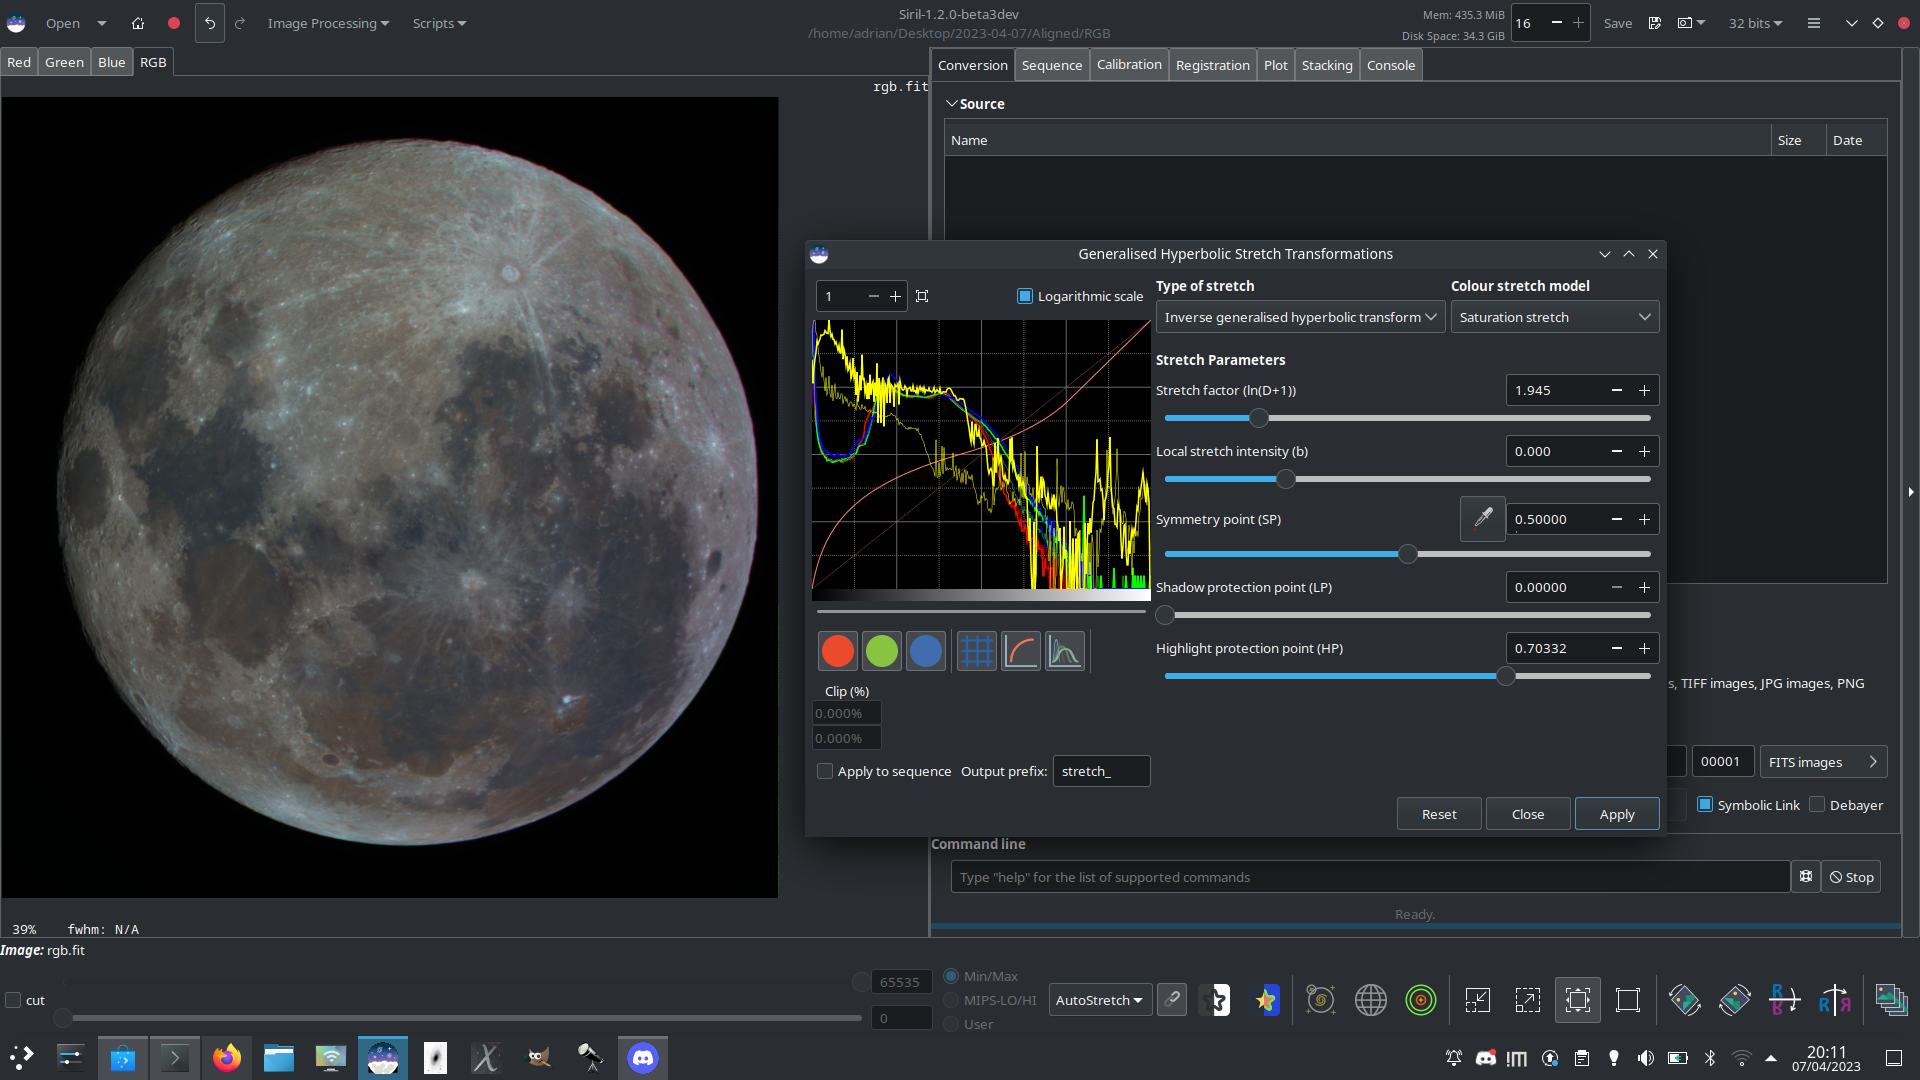 Applying GHS to the saturation channel to create a 'Mineral Moon'